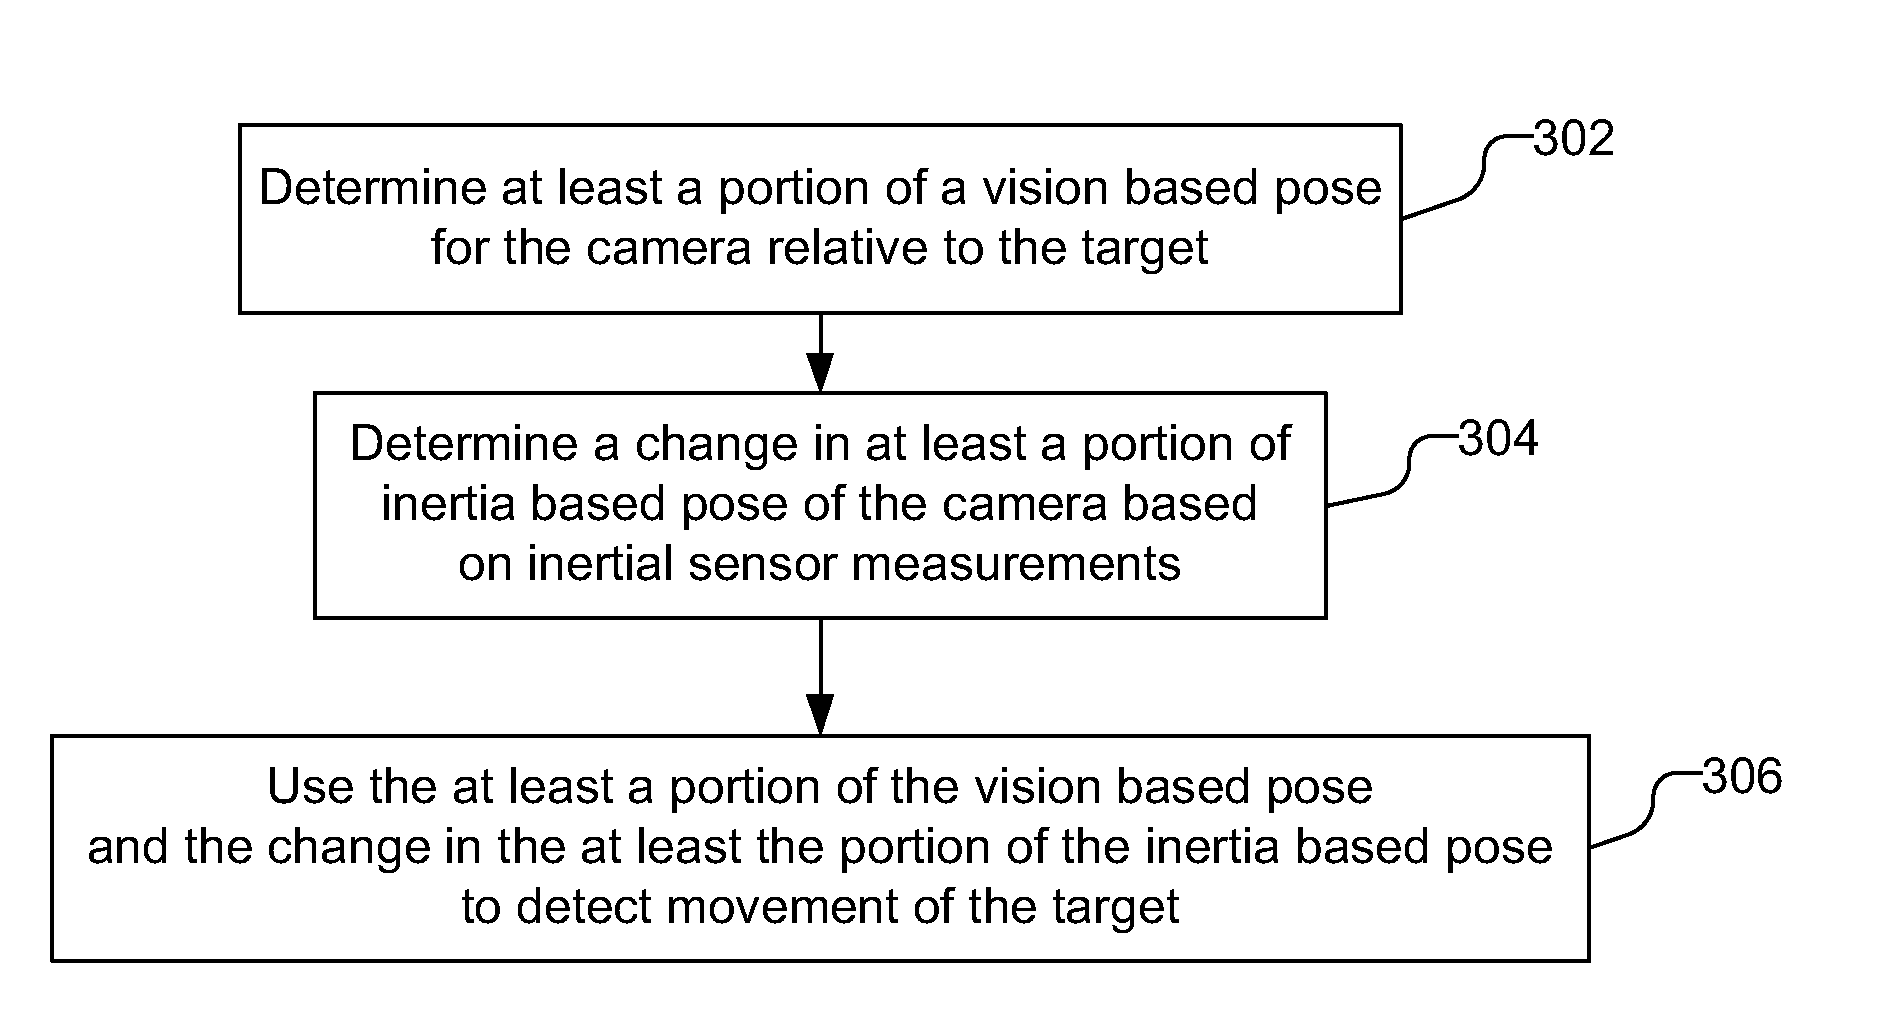 Adaptive switching between vision aided ins and vision only pose